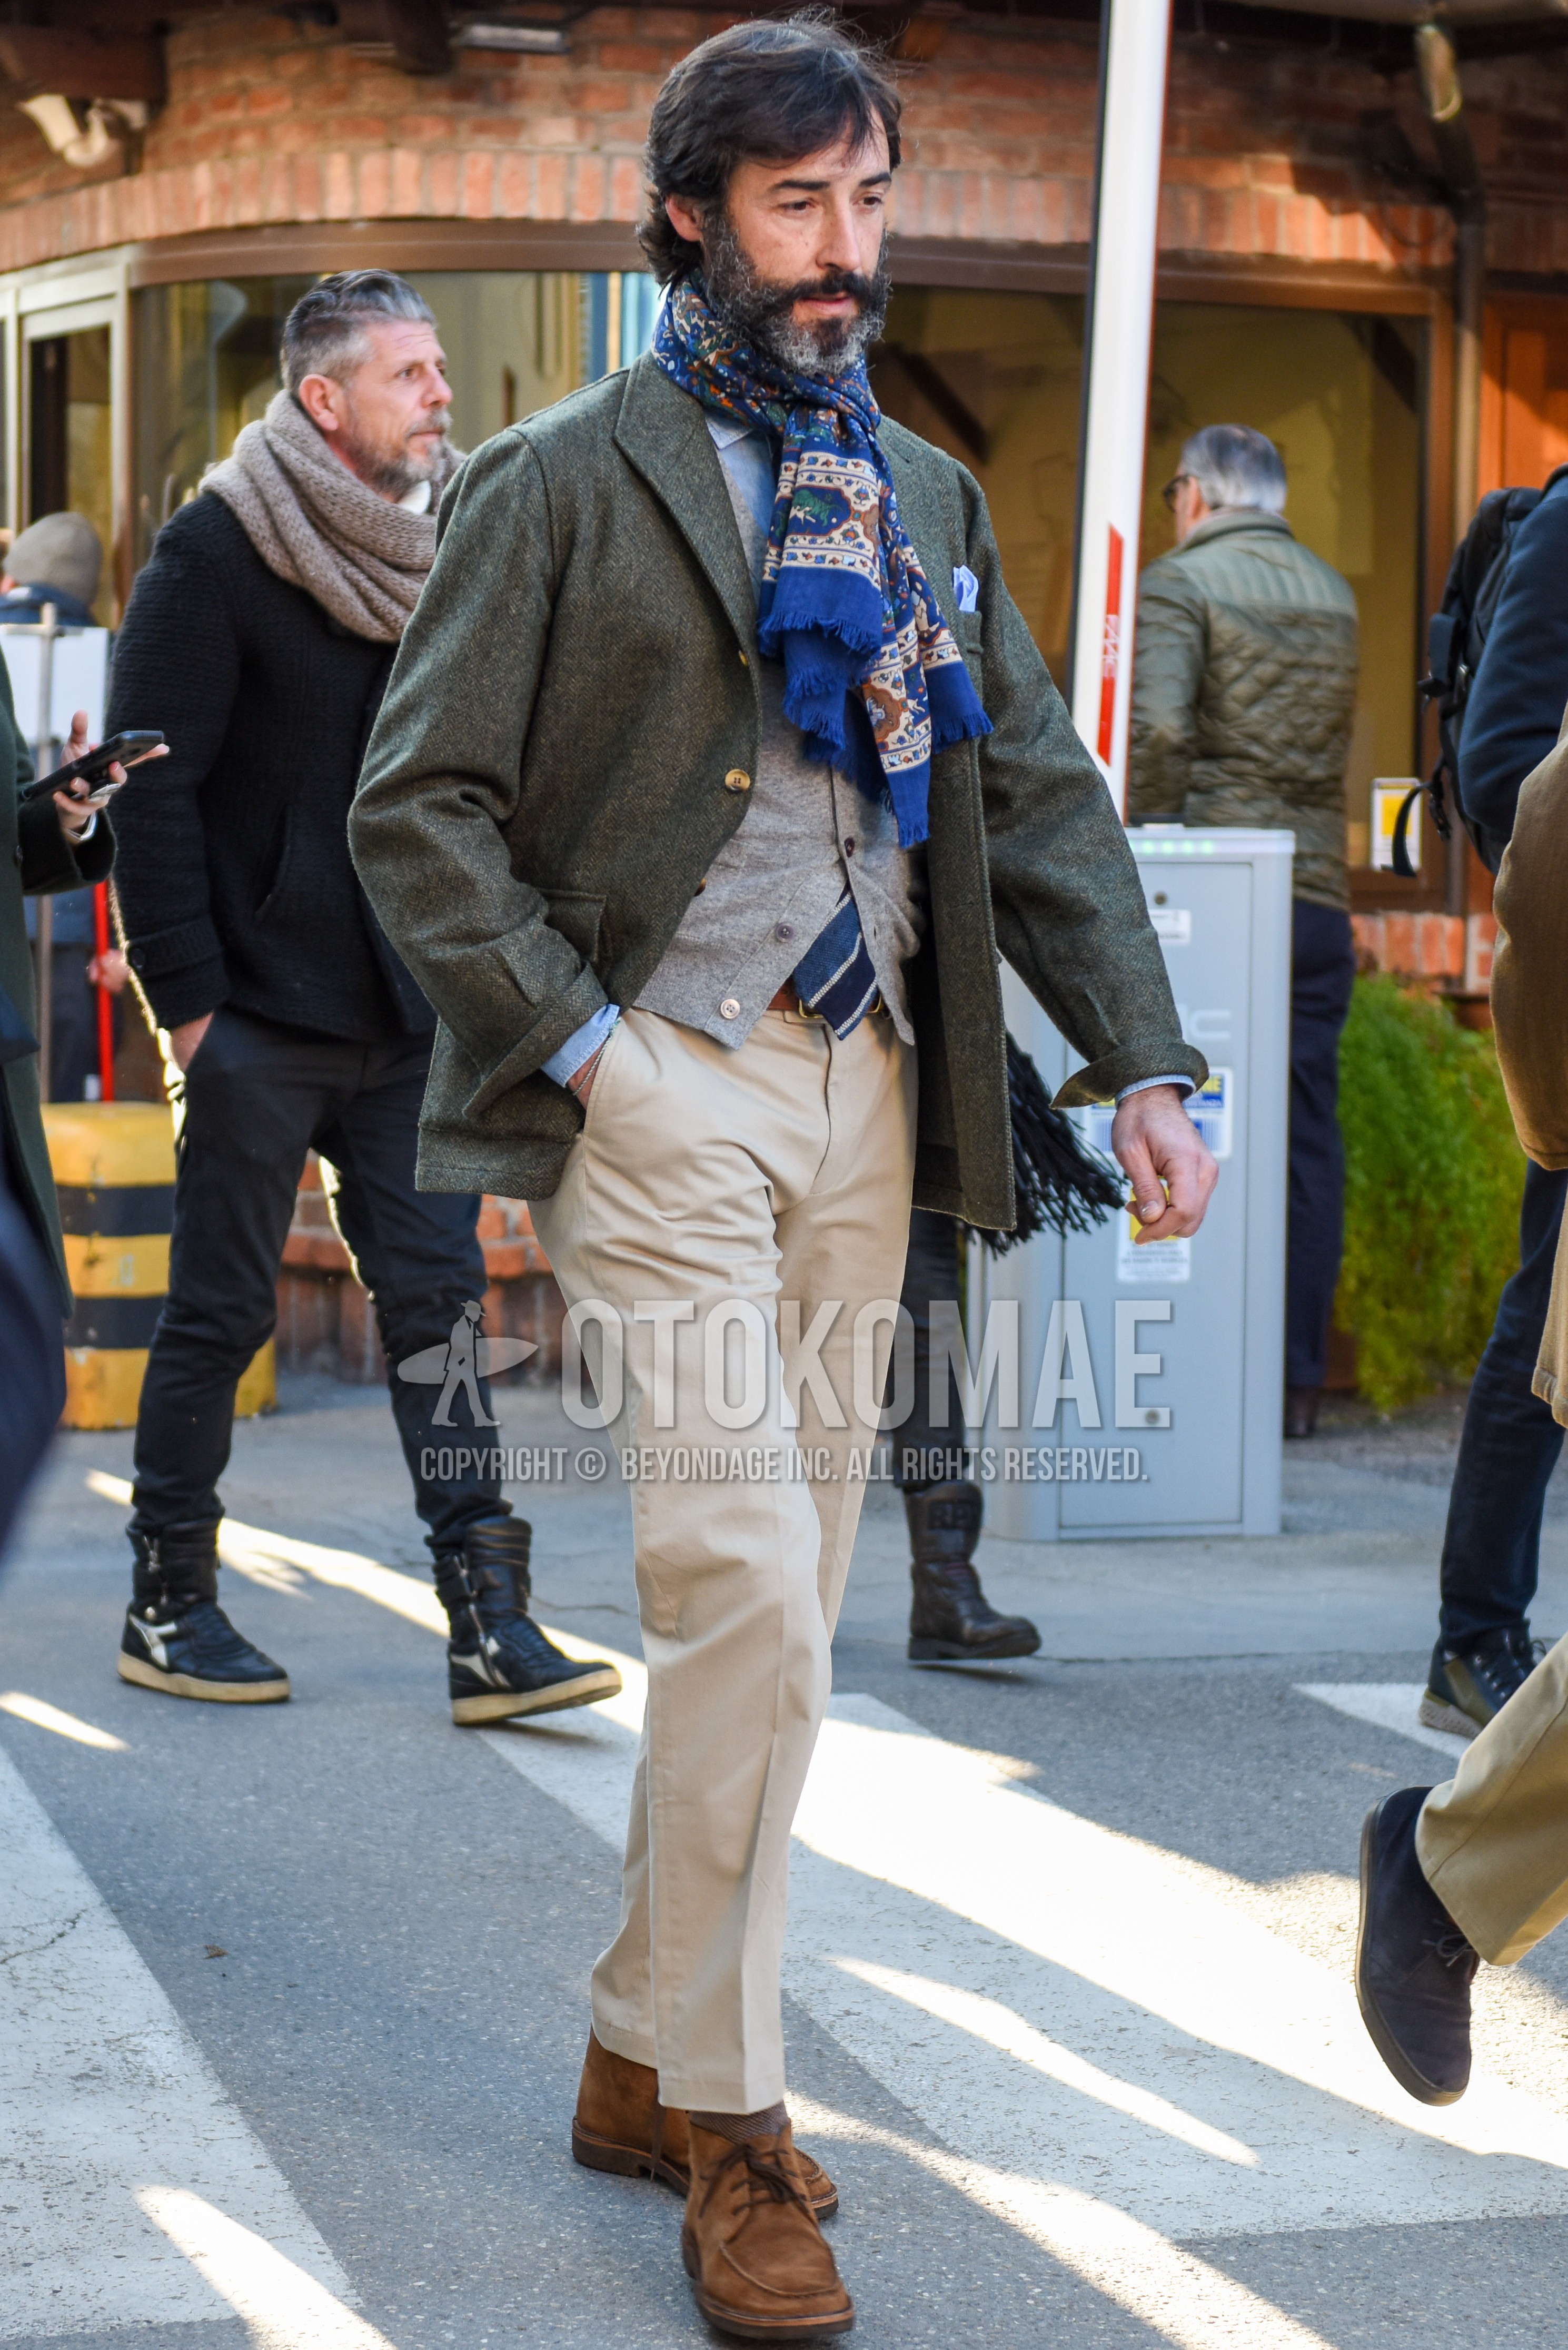 Men's autumn winter outfit with gray scarf scarf, gray plain shirt jacket, gray plain cardigan, light blue plain shirt, beige plain chinos, beige plain cropped pants, beige plain socks, brown chukka boots.